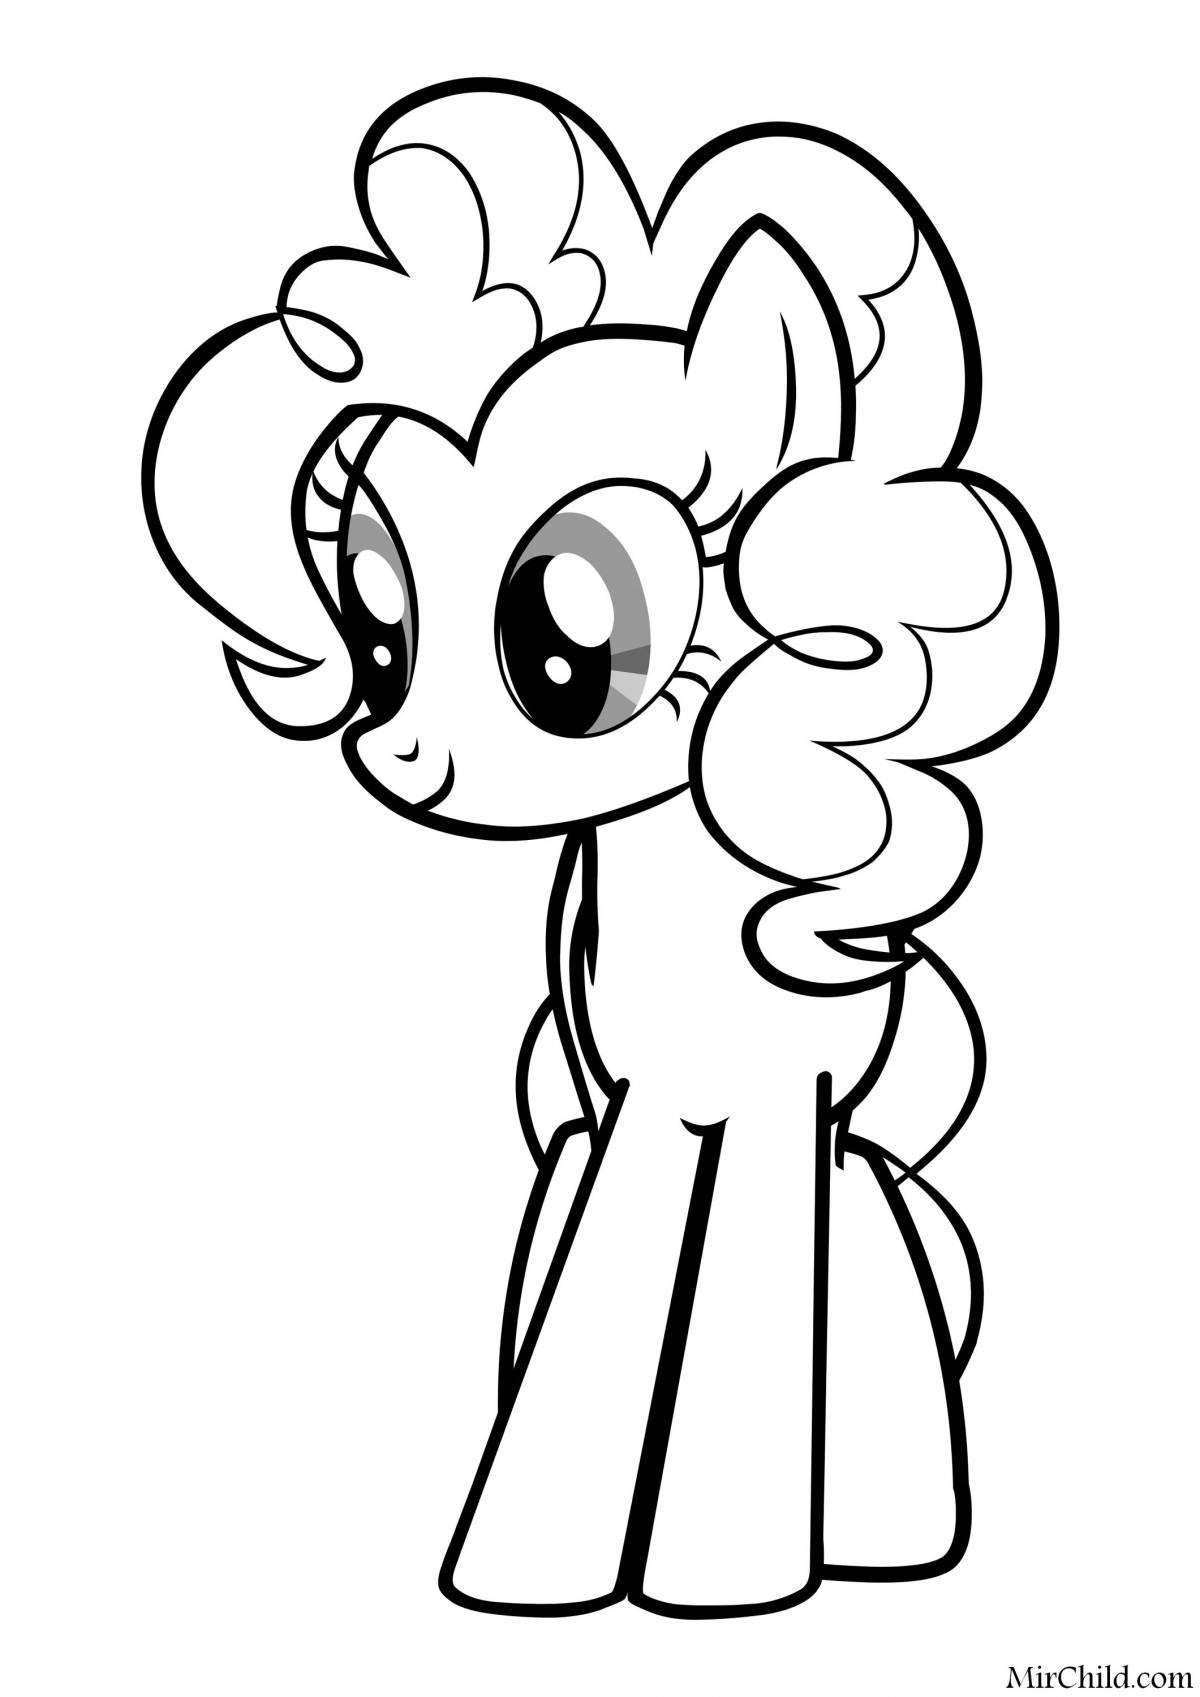 Pinkie Pie's cute pony coloring book